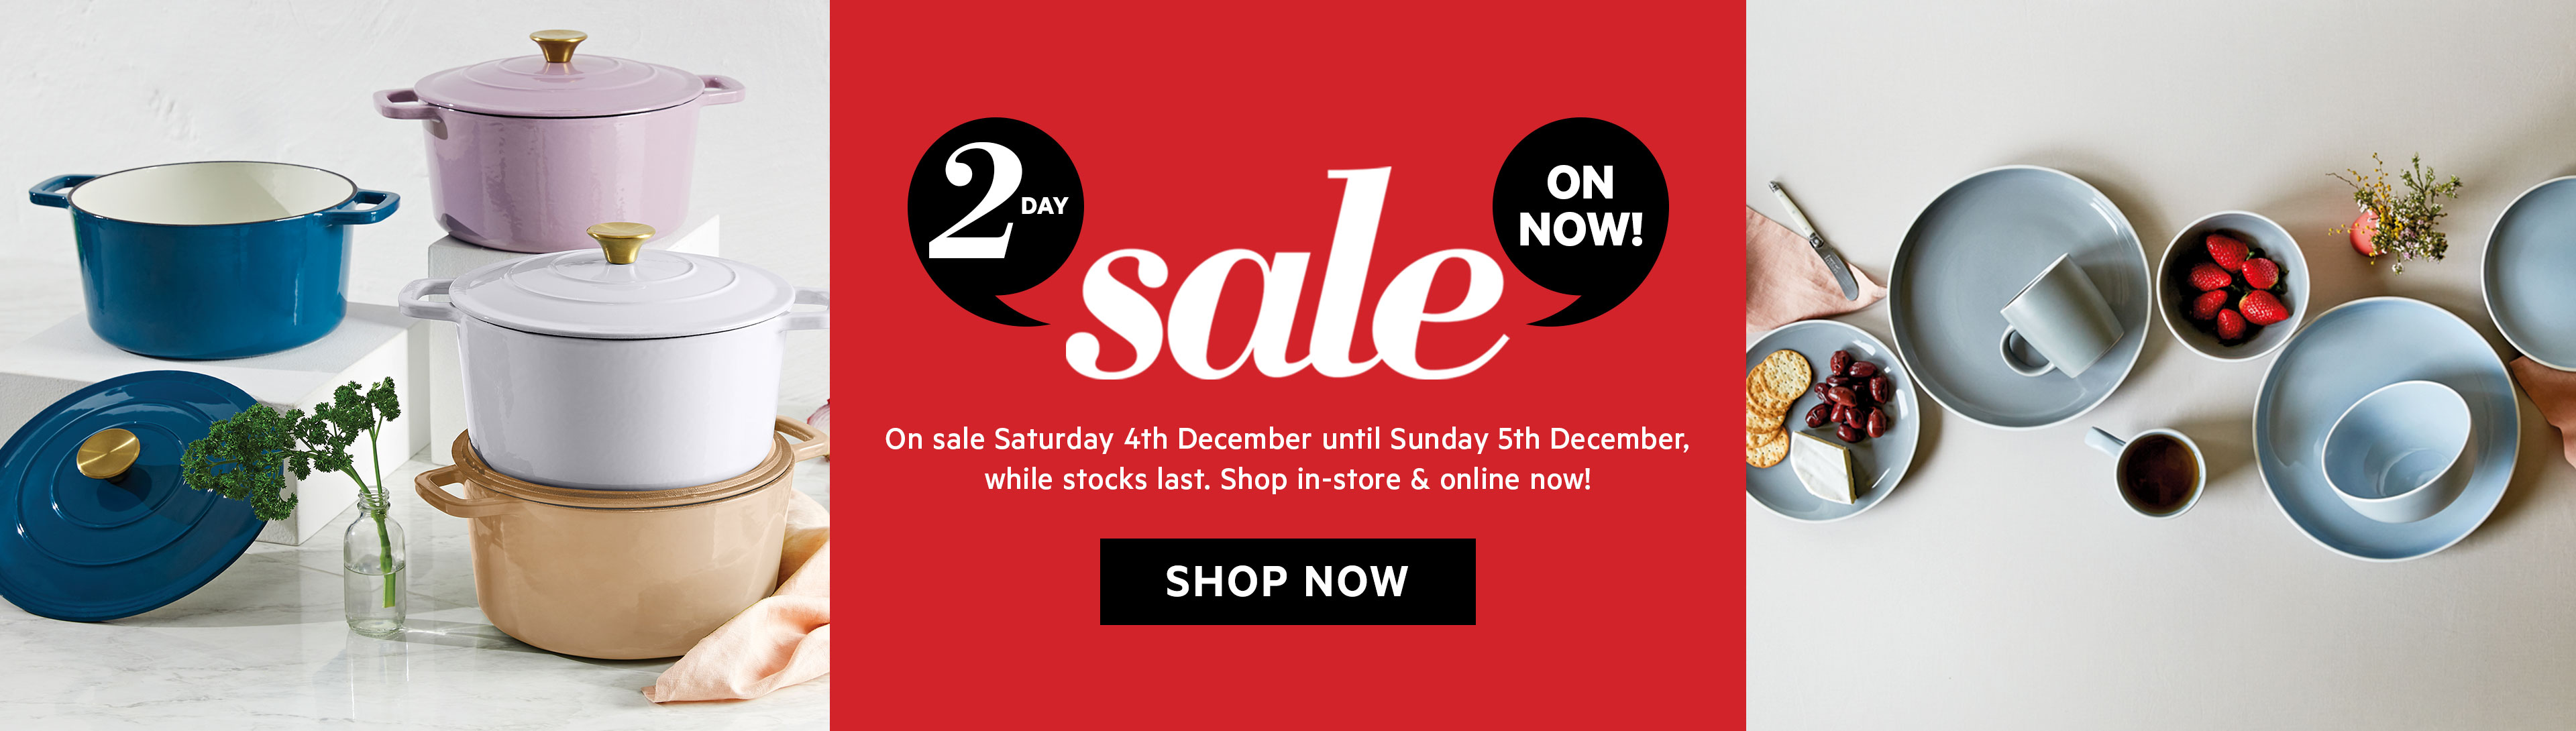 2 Day sale up to 60% OFF on kitchenware, clothing, footwear & more